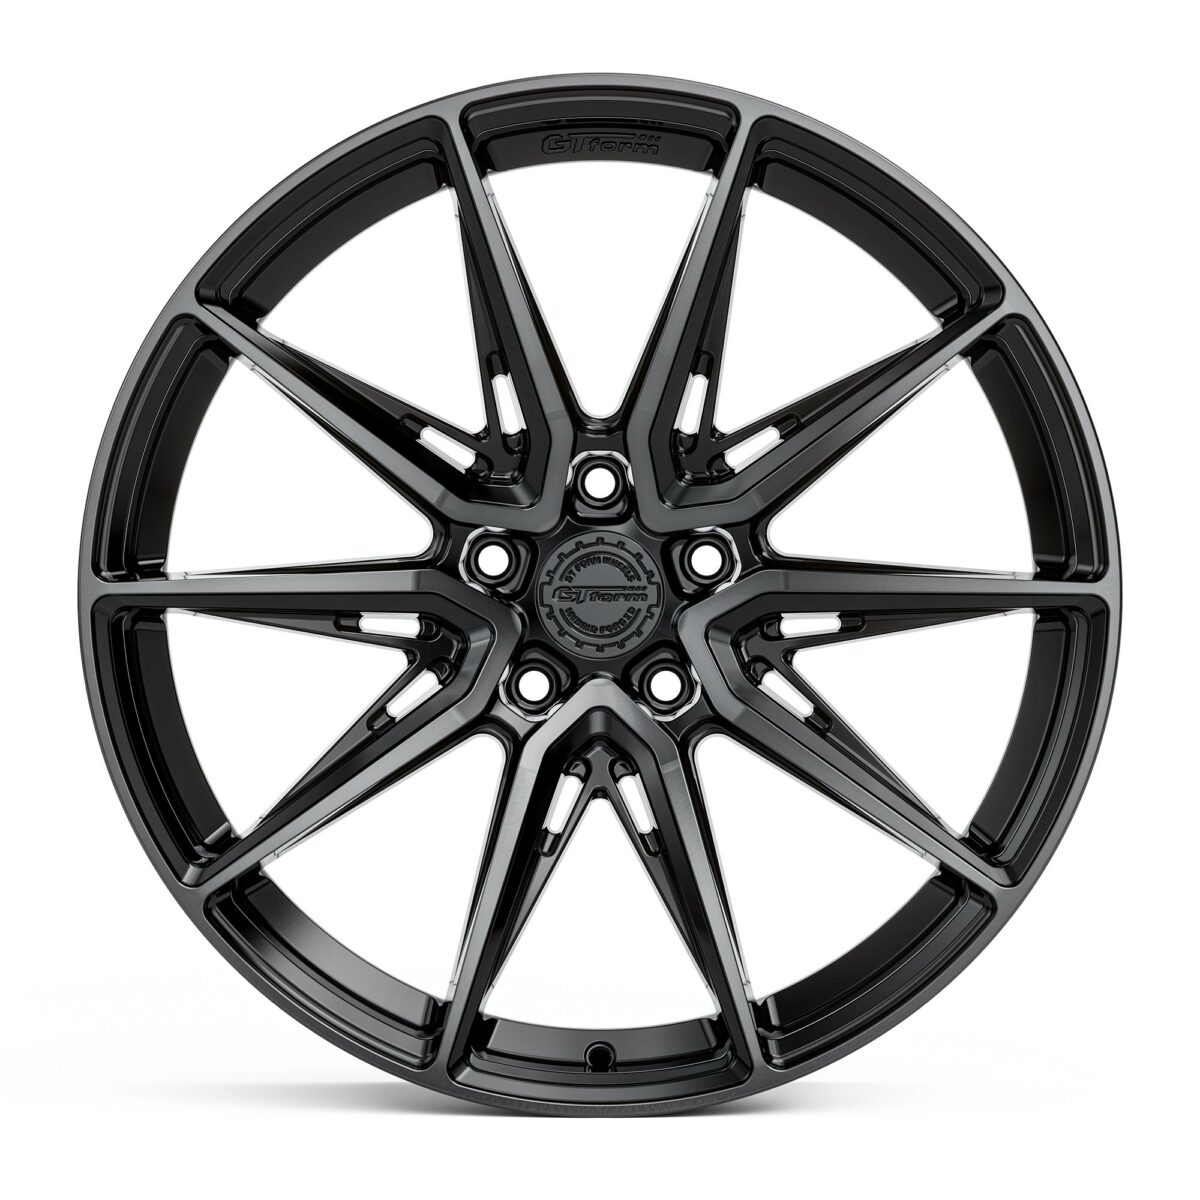 PERFORMANCE WHEELS GT FORM HF4.1 HYBRID FORGED DOUBLE TINTED BLACK 20X9 20X10.5 20X12 STAGGERED RIMS